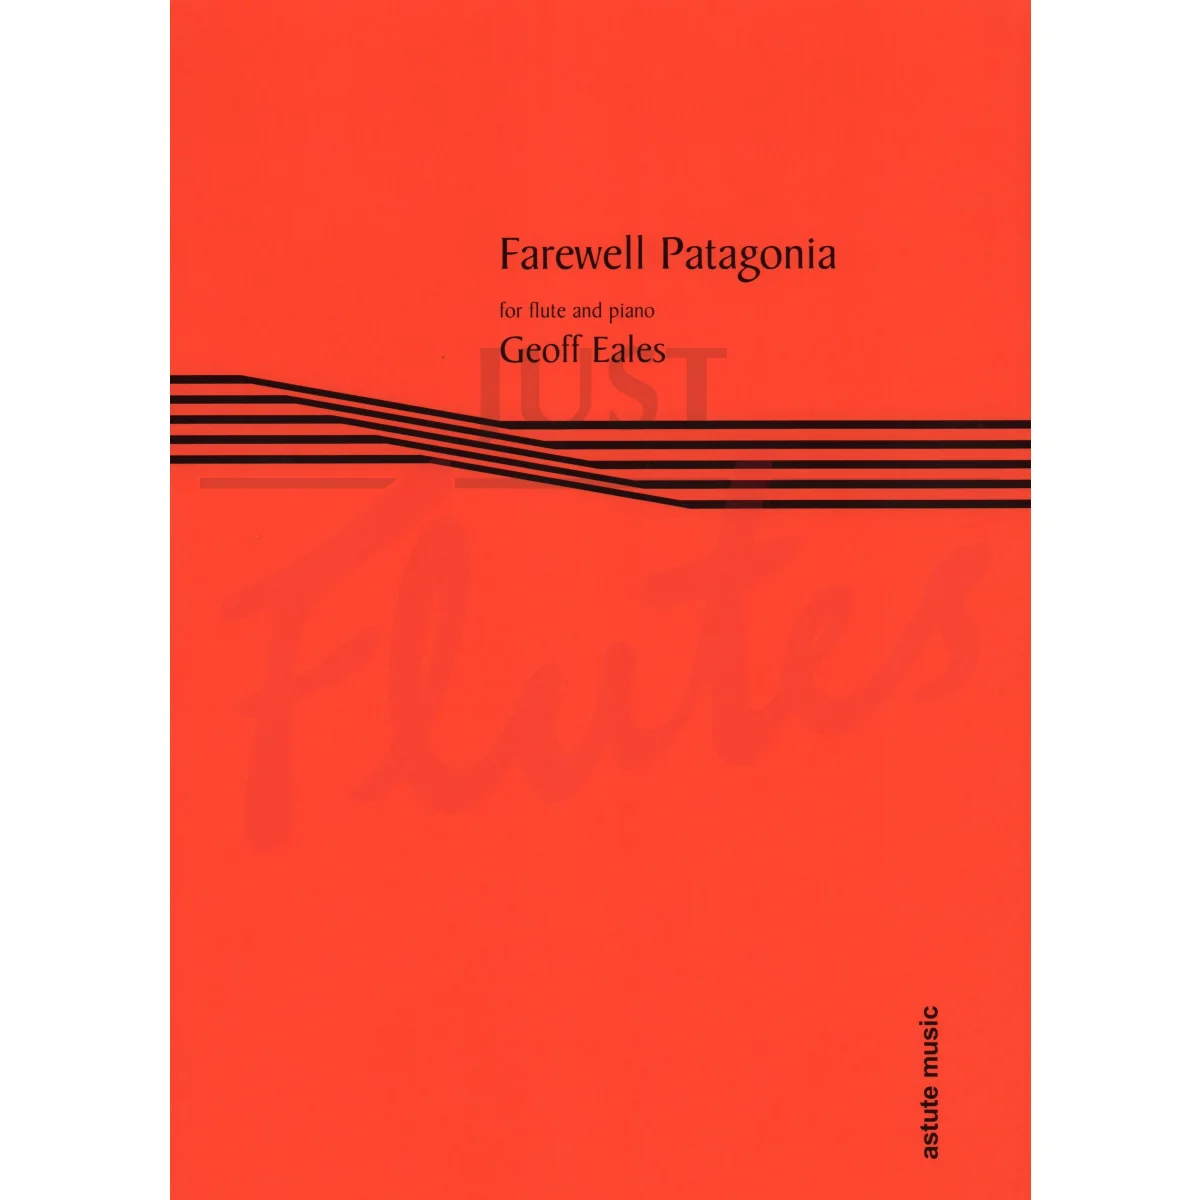 Farewell Patagonia for Flute and Piano